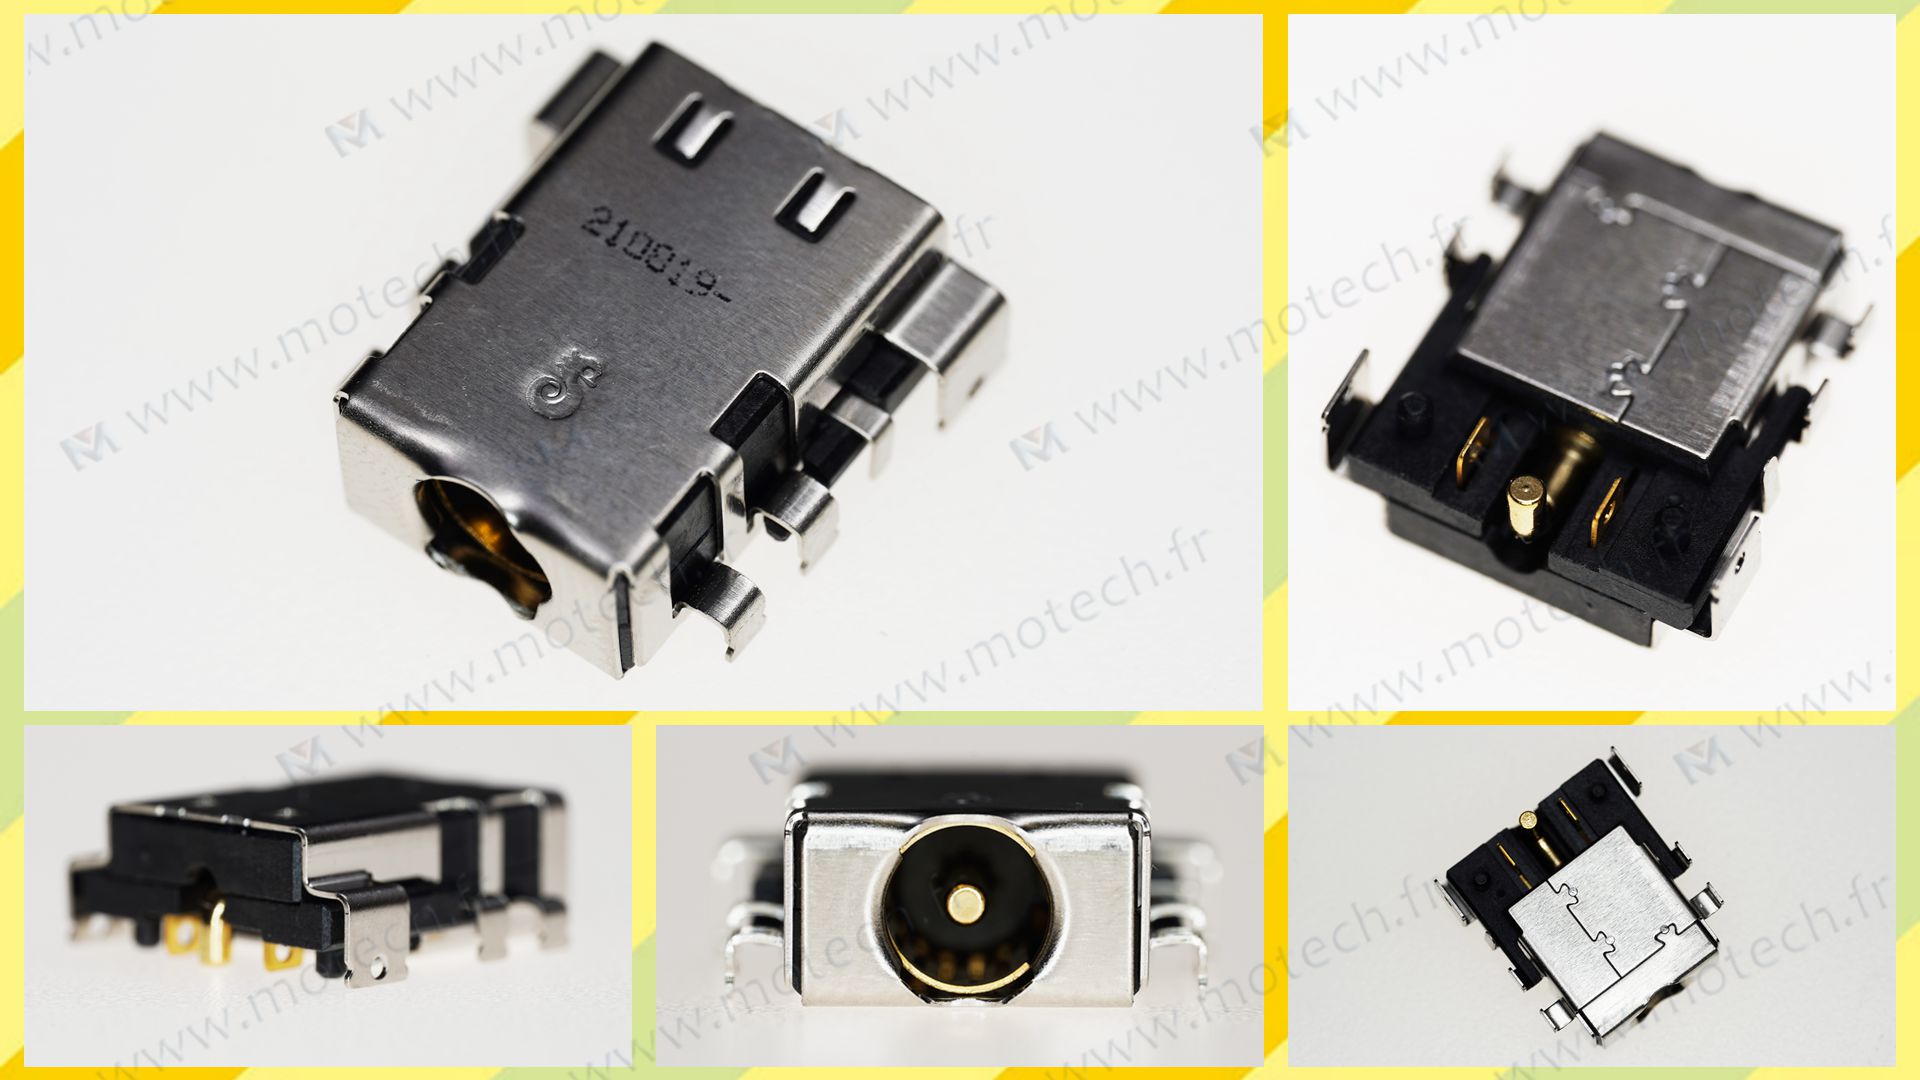 Acer AN515-55-76WN charging connector, Acer AN515-55-76WN DC Power Jack, Acer AN515-55-76WN Power Jack, Acer AN515-55-76WN plug, Acer AN515-55-76WN Jack socket, Acer AN515-55-76WN connecteur de charge, 